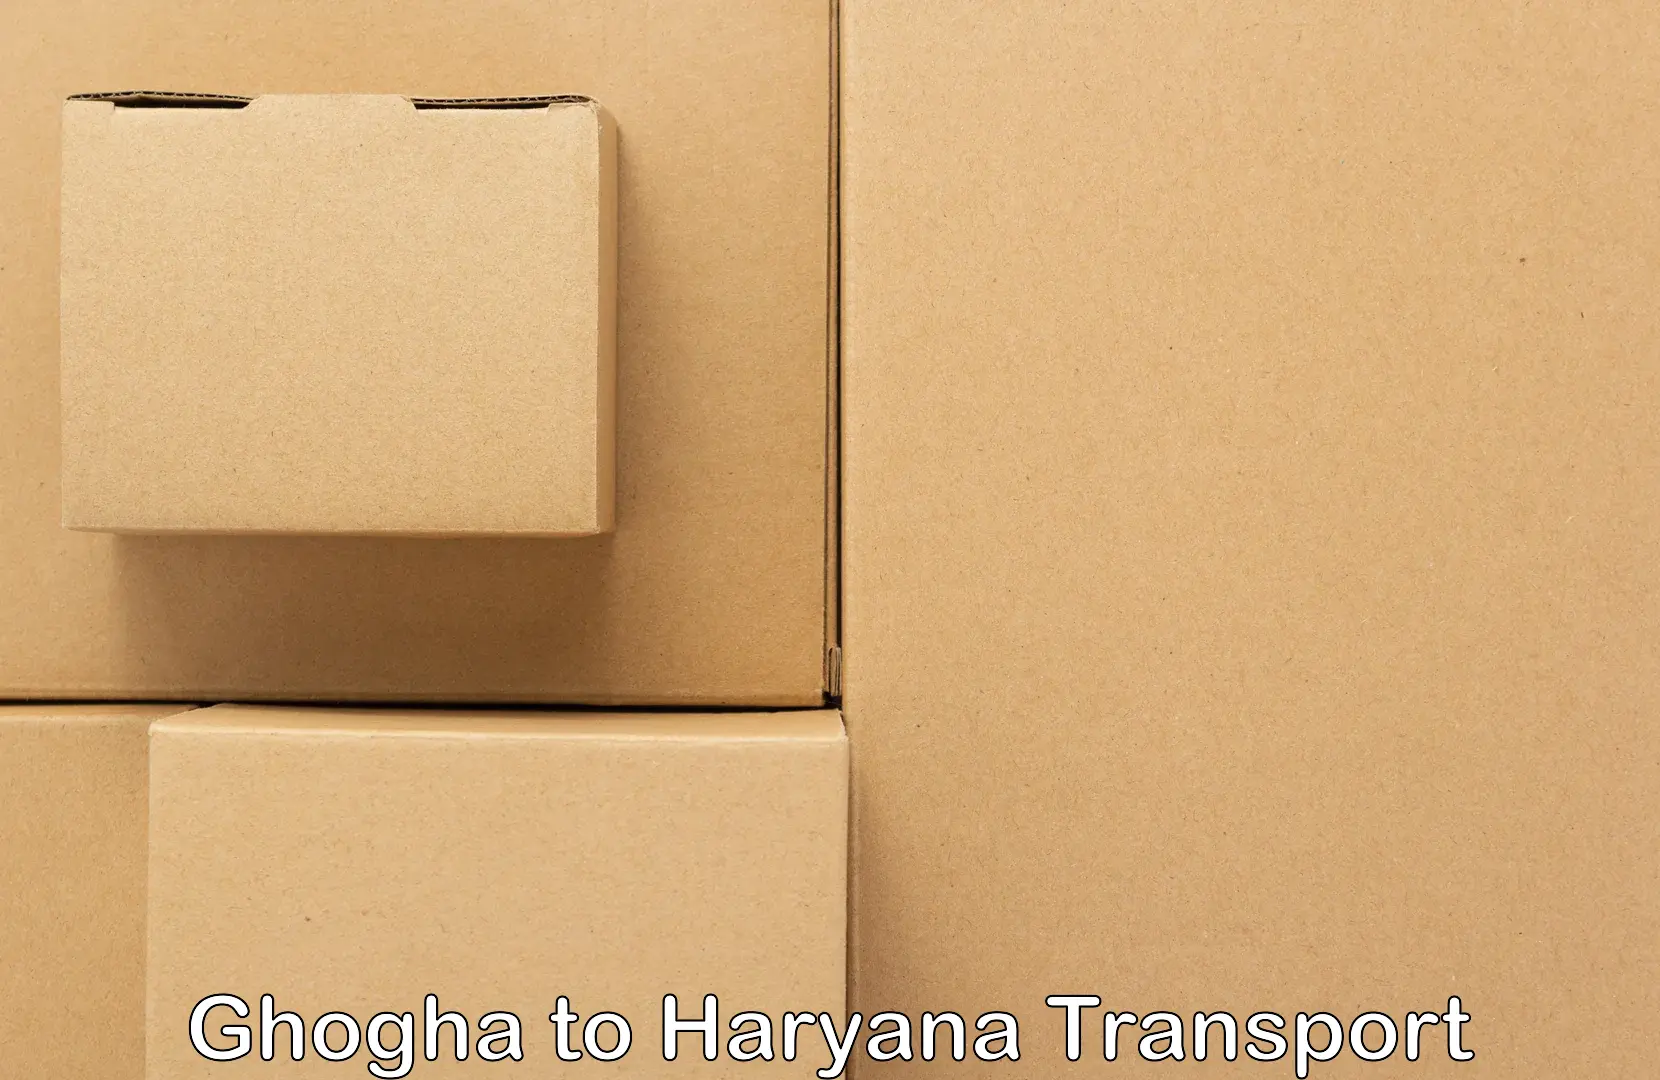 Container transport service Ghogha to Chaudhary Charan Singh Haryana Agricultural University Hisar